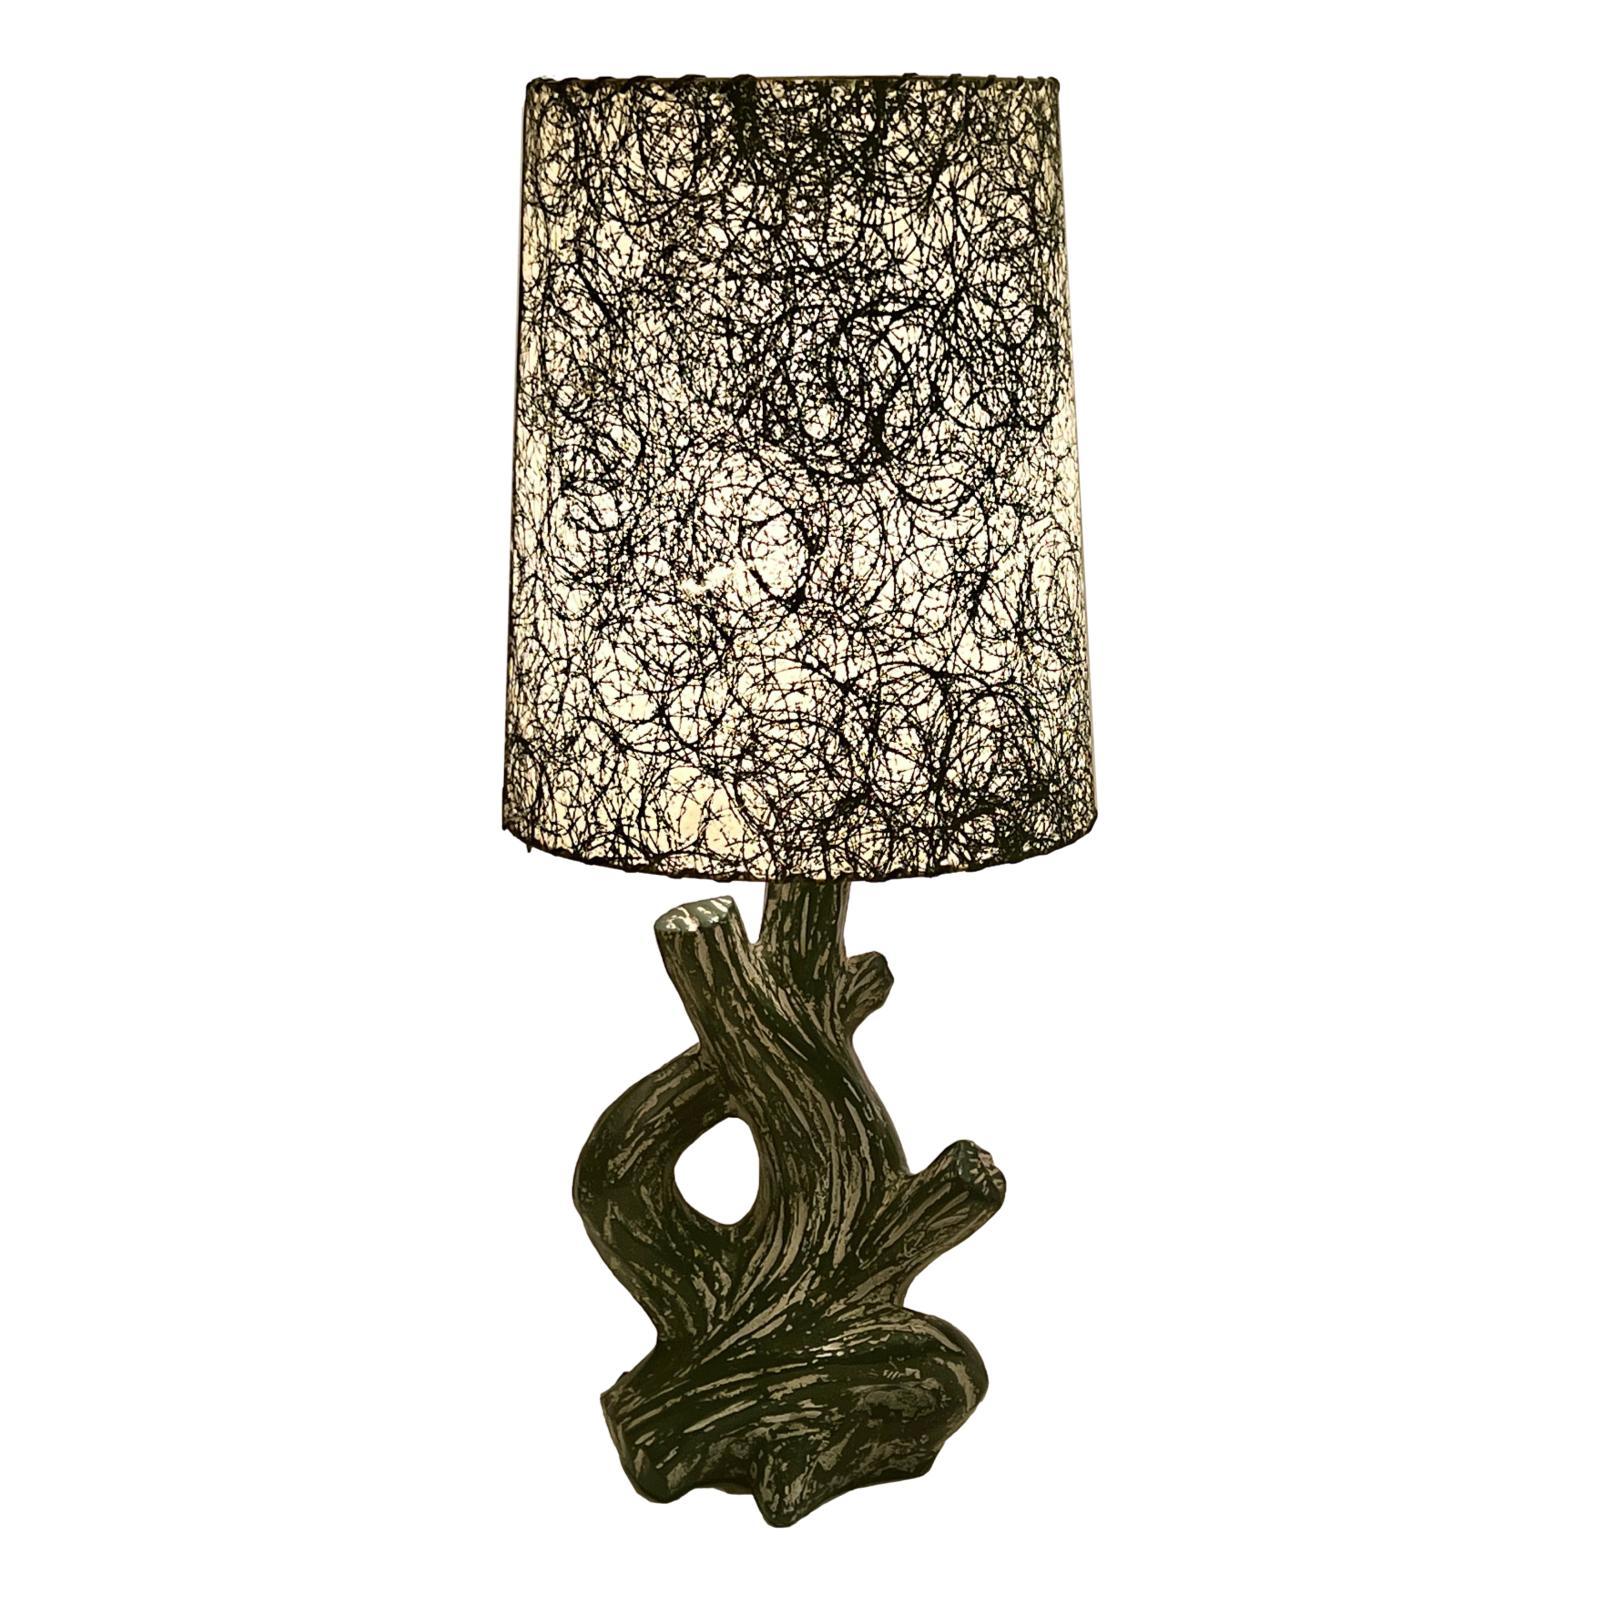 European Pair of Midcentury Tree Trunk Lamps For Sale